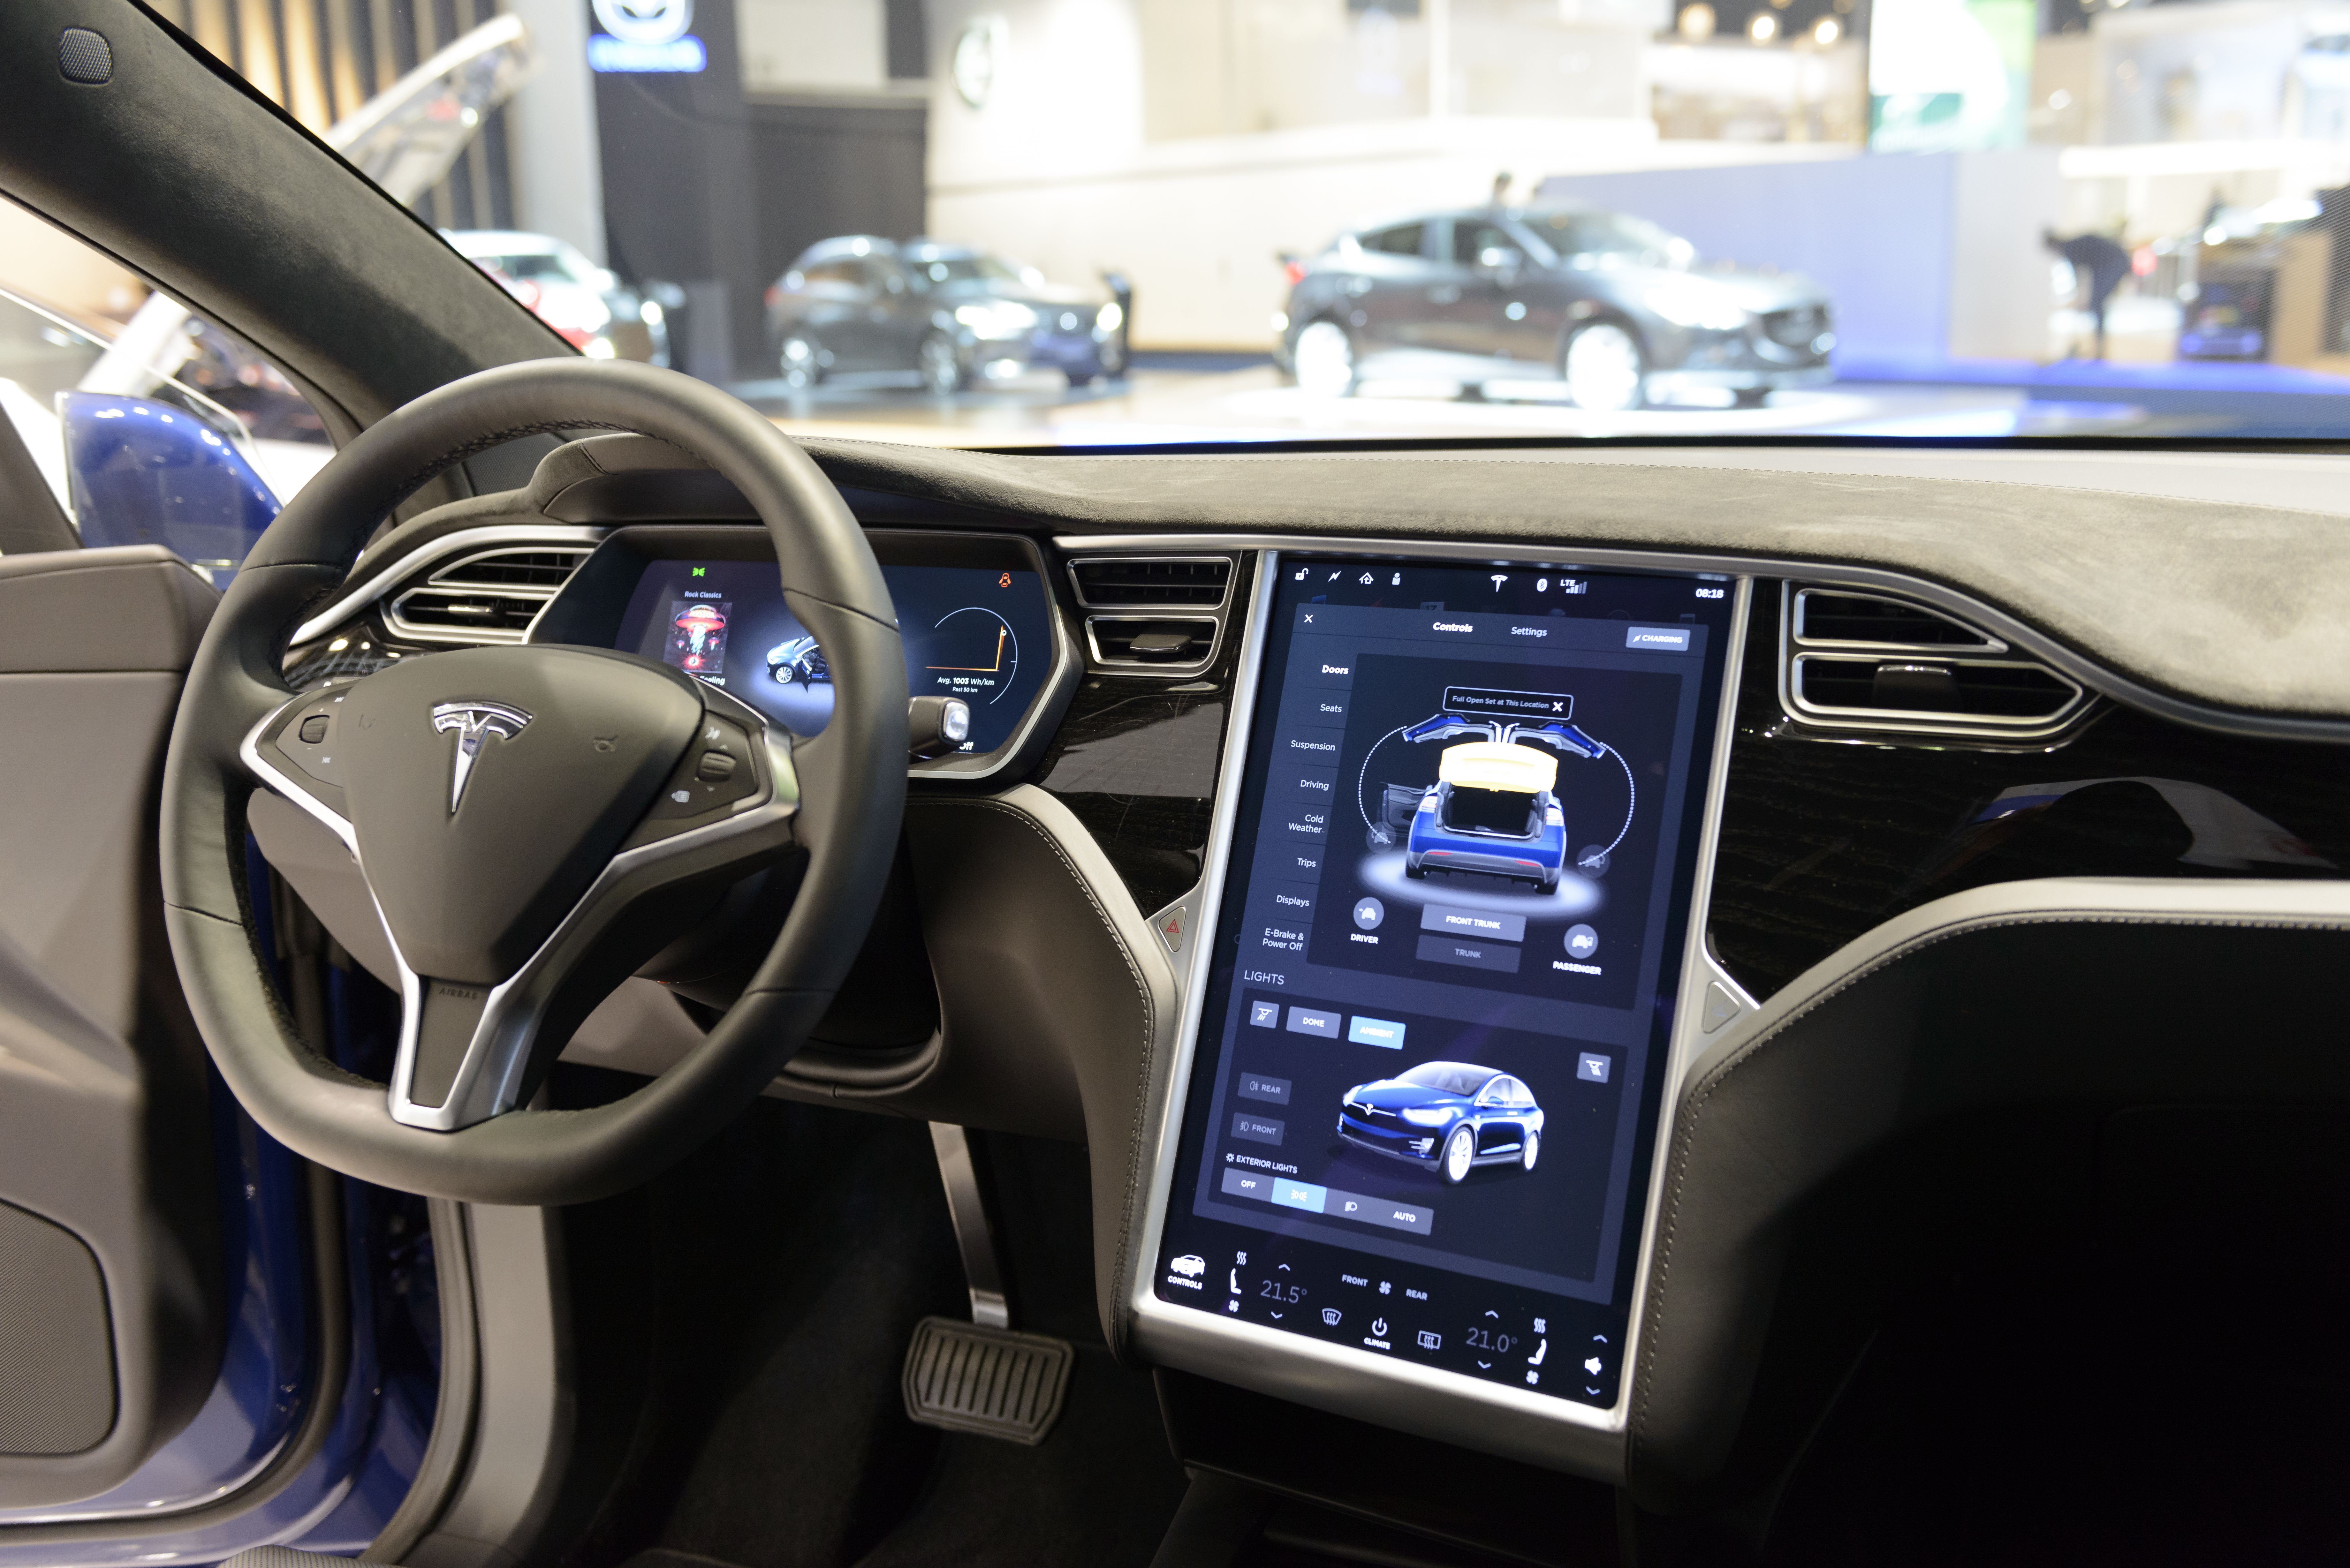 Tesla Agrees To Stop Allowing Video Games On Screens In Moving Cars